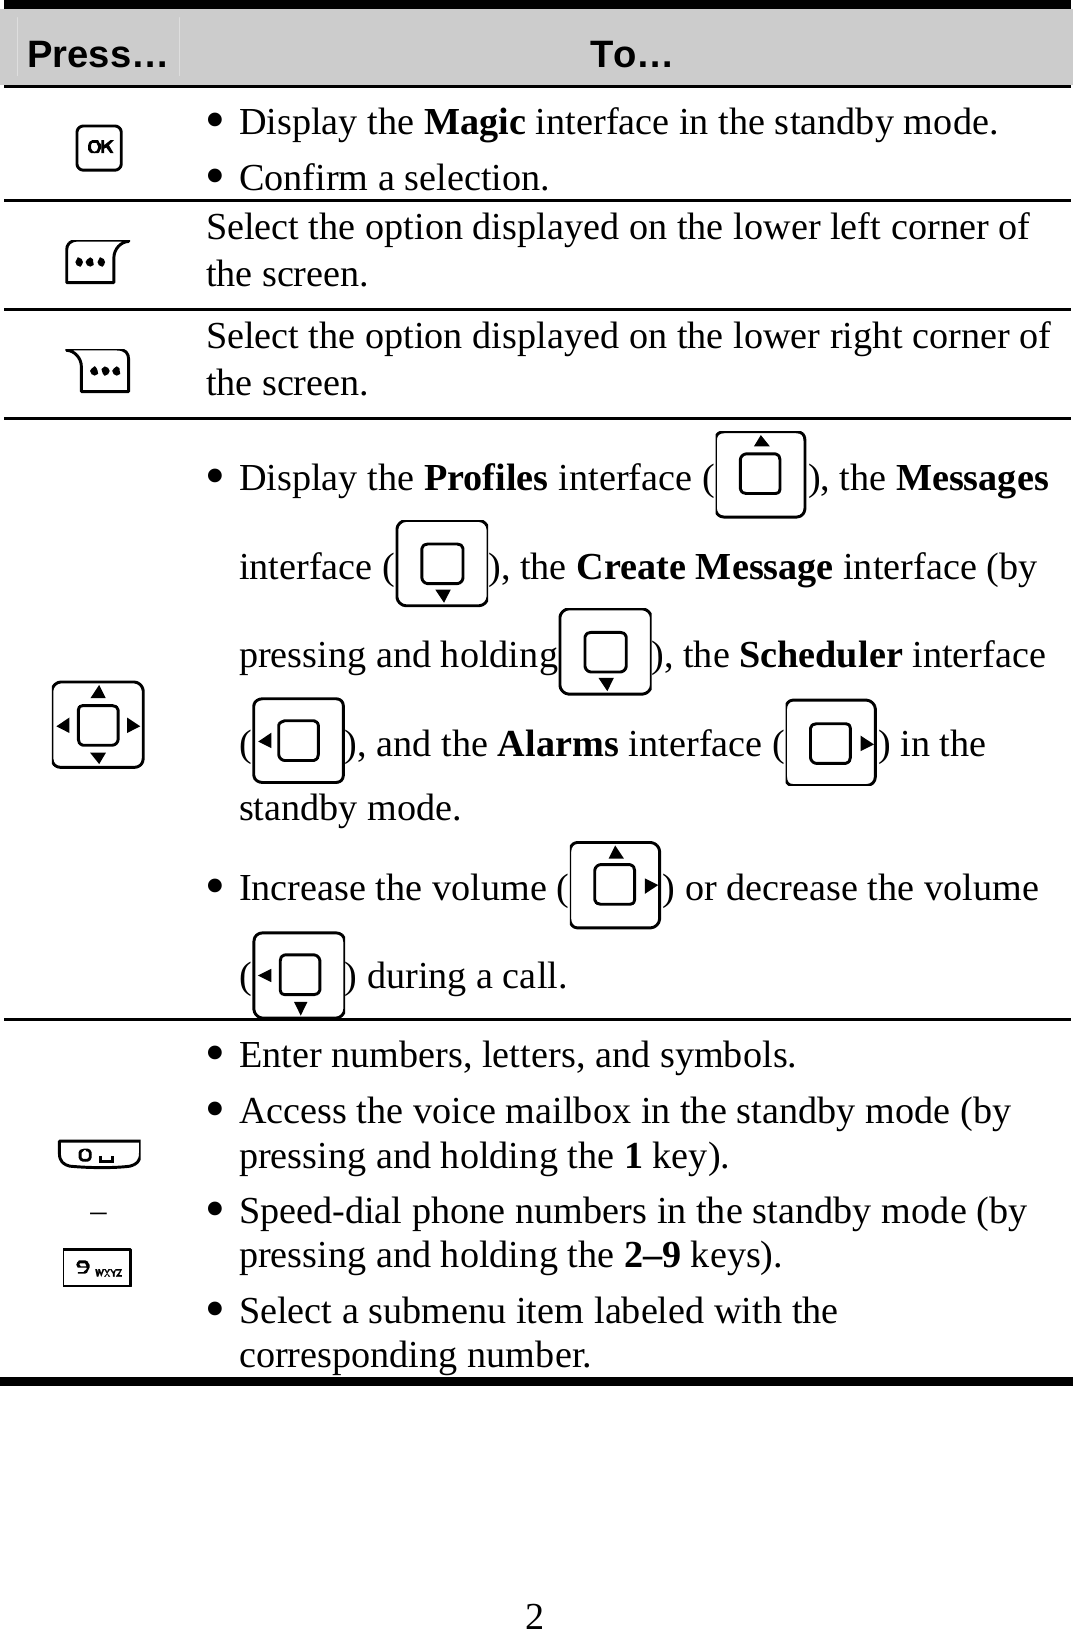 2 Press…  To…  z Display the Magic interface in the standby mode. z Confirm a selection.  Select the option displayed on the lower left corner of the screen.  Select the option displayed on the lower right corner of the screen.  z Display the Profiles interface ( ), the Messages interface ( ), the Create Message interface (by pressing and holding ), the Scheduler interface (), and the Alarms interface ( ) in the standby mode. z Increase the volume ( ) or decrease the volume () during a call.  –  z Enter numbers, letters, and symbols. z Access the voice mailbox in the standby mode (by pressing and holding the 1 key). z Speed-dial phone numbers in the standby mode (by pressing and holding the 2–9 keys). z Select a submenu item labeled with the corresponding number. 